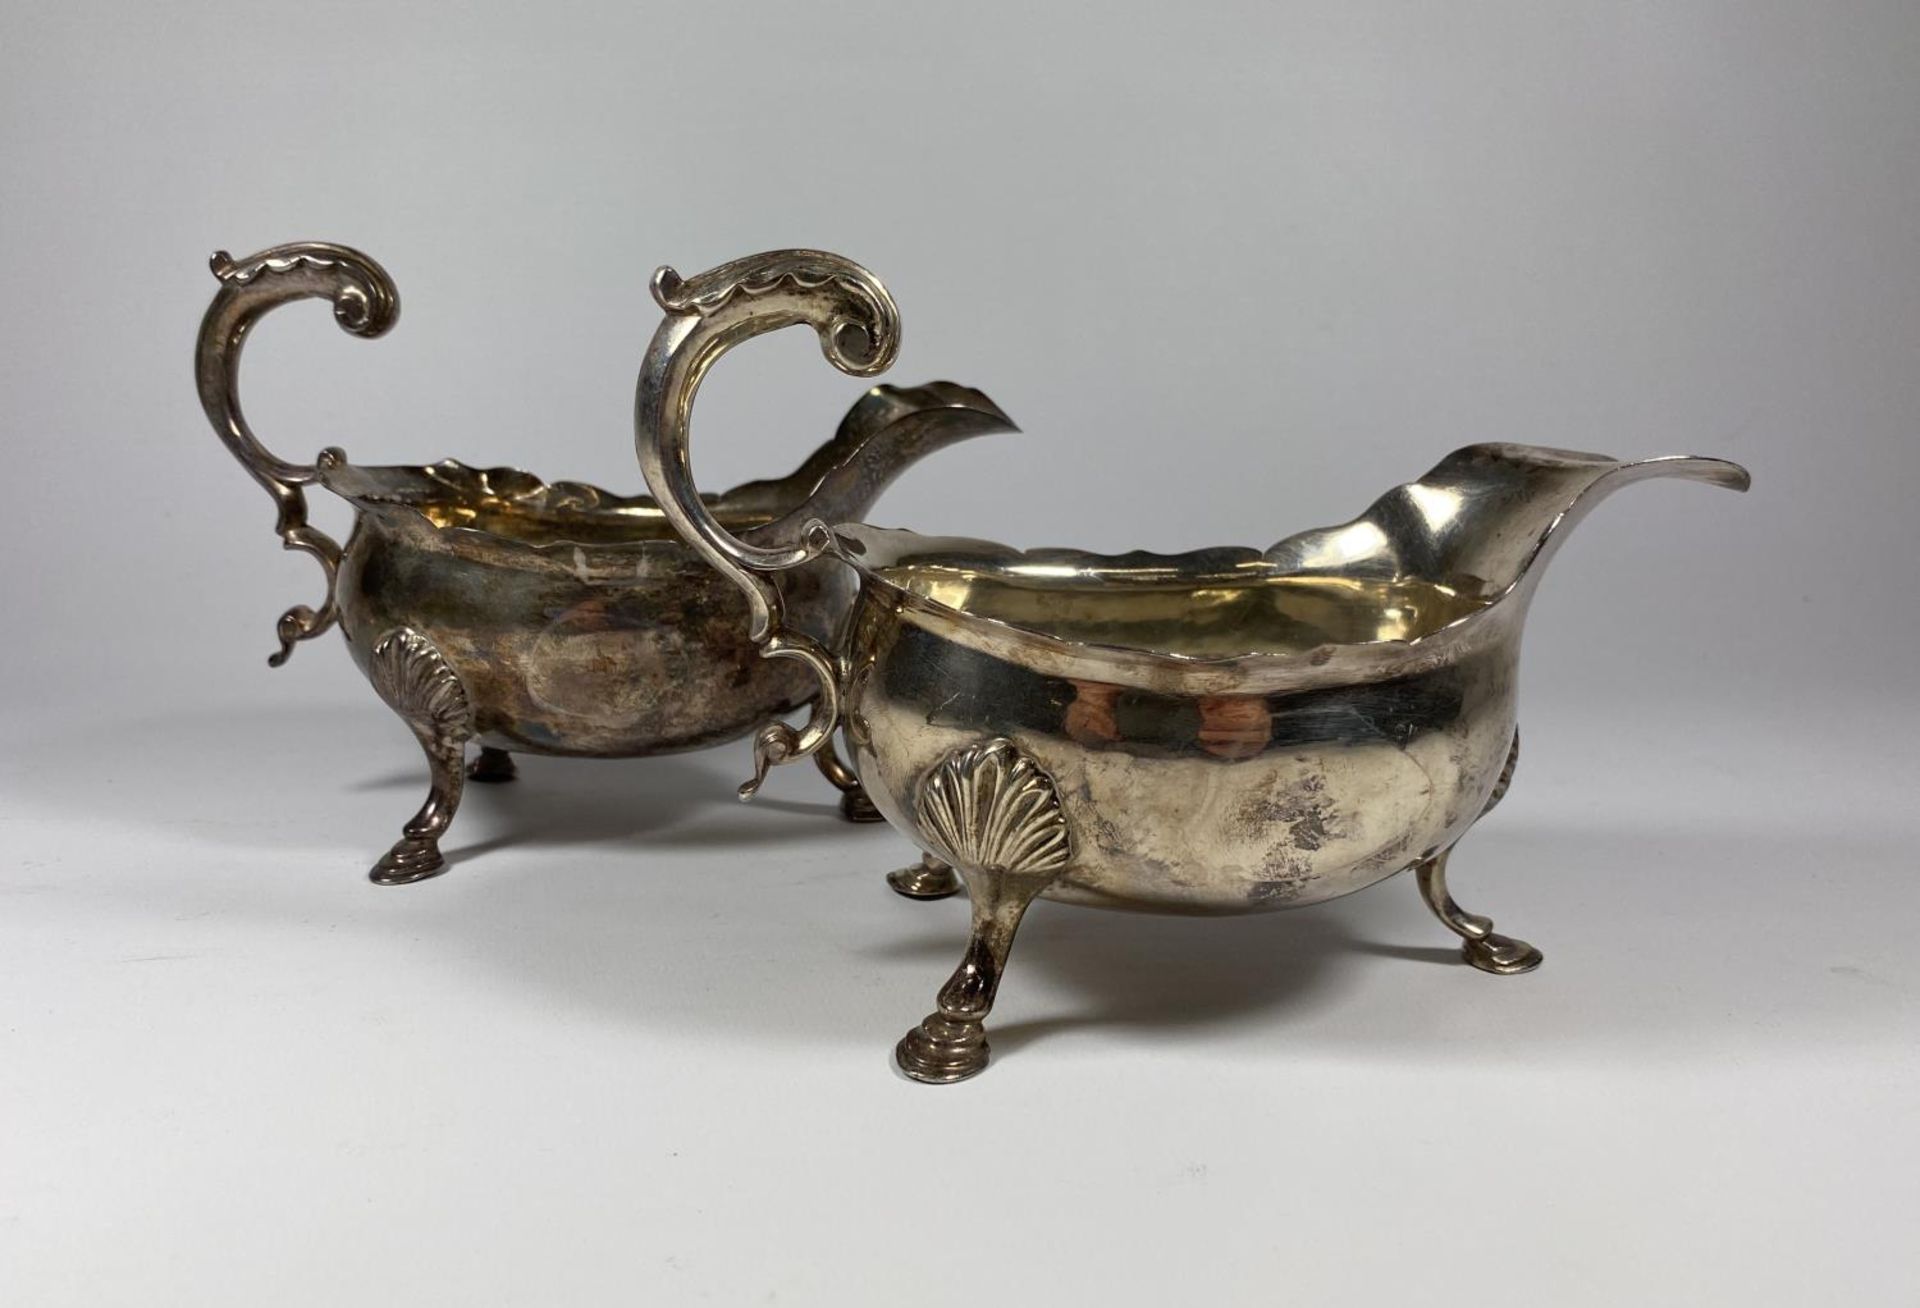 A PAIR OF GEORGE III HALLMARKED SILVER SAUCE / GRAVY BOATS, POSSIBLY BY GEORGE SMITH II, DATES TO